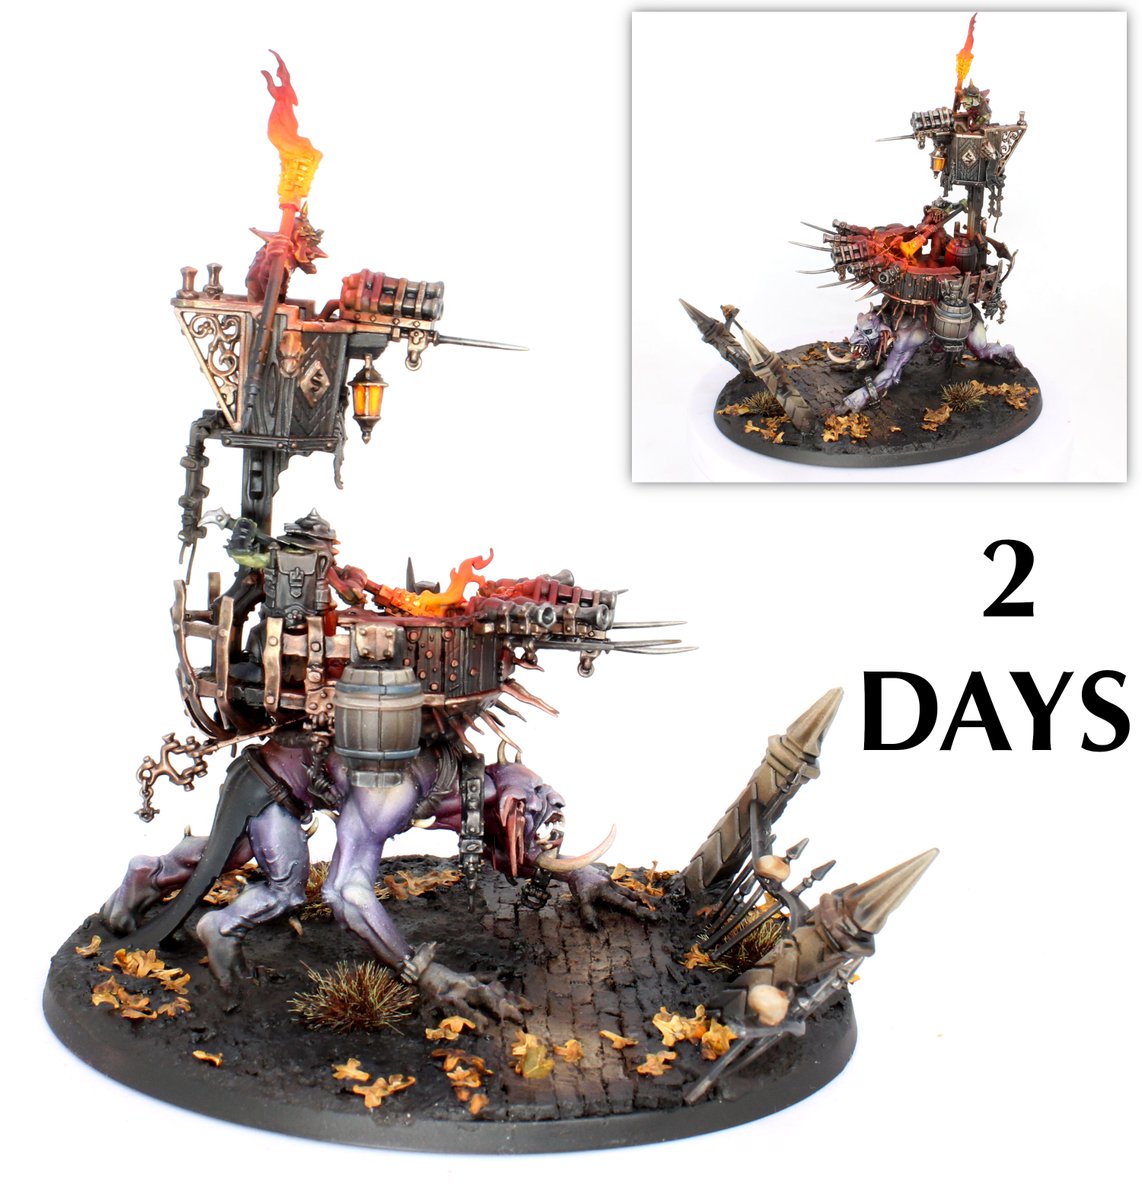 2 Days till the WHW AOS Narrative event

Sloggoths loaded with shot and powder, stabby bits sharpened and braziers lit. 

The Ghoulmere rides out

#warhammercommunity #ageofsigmar